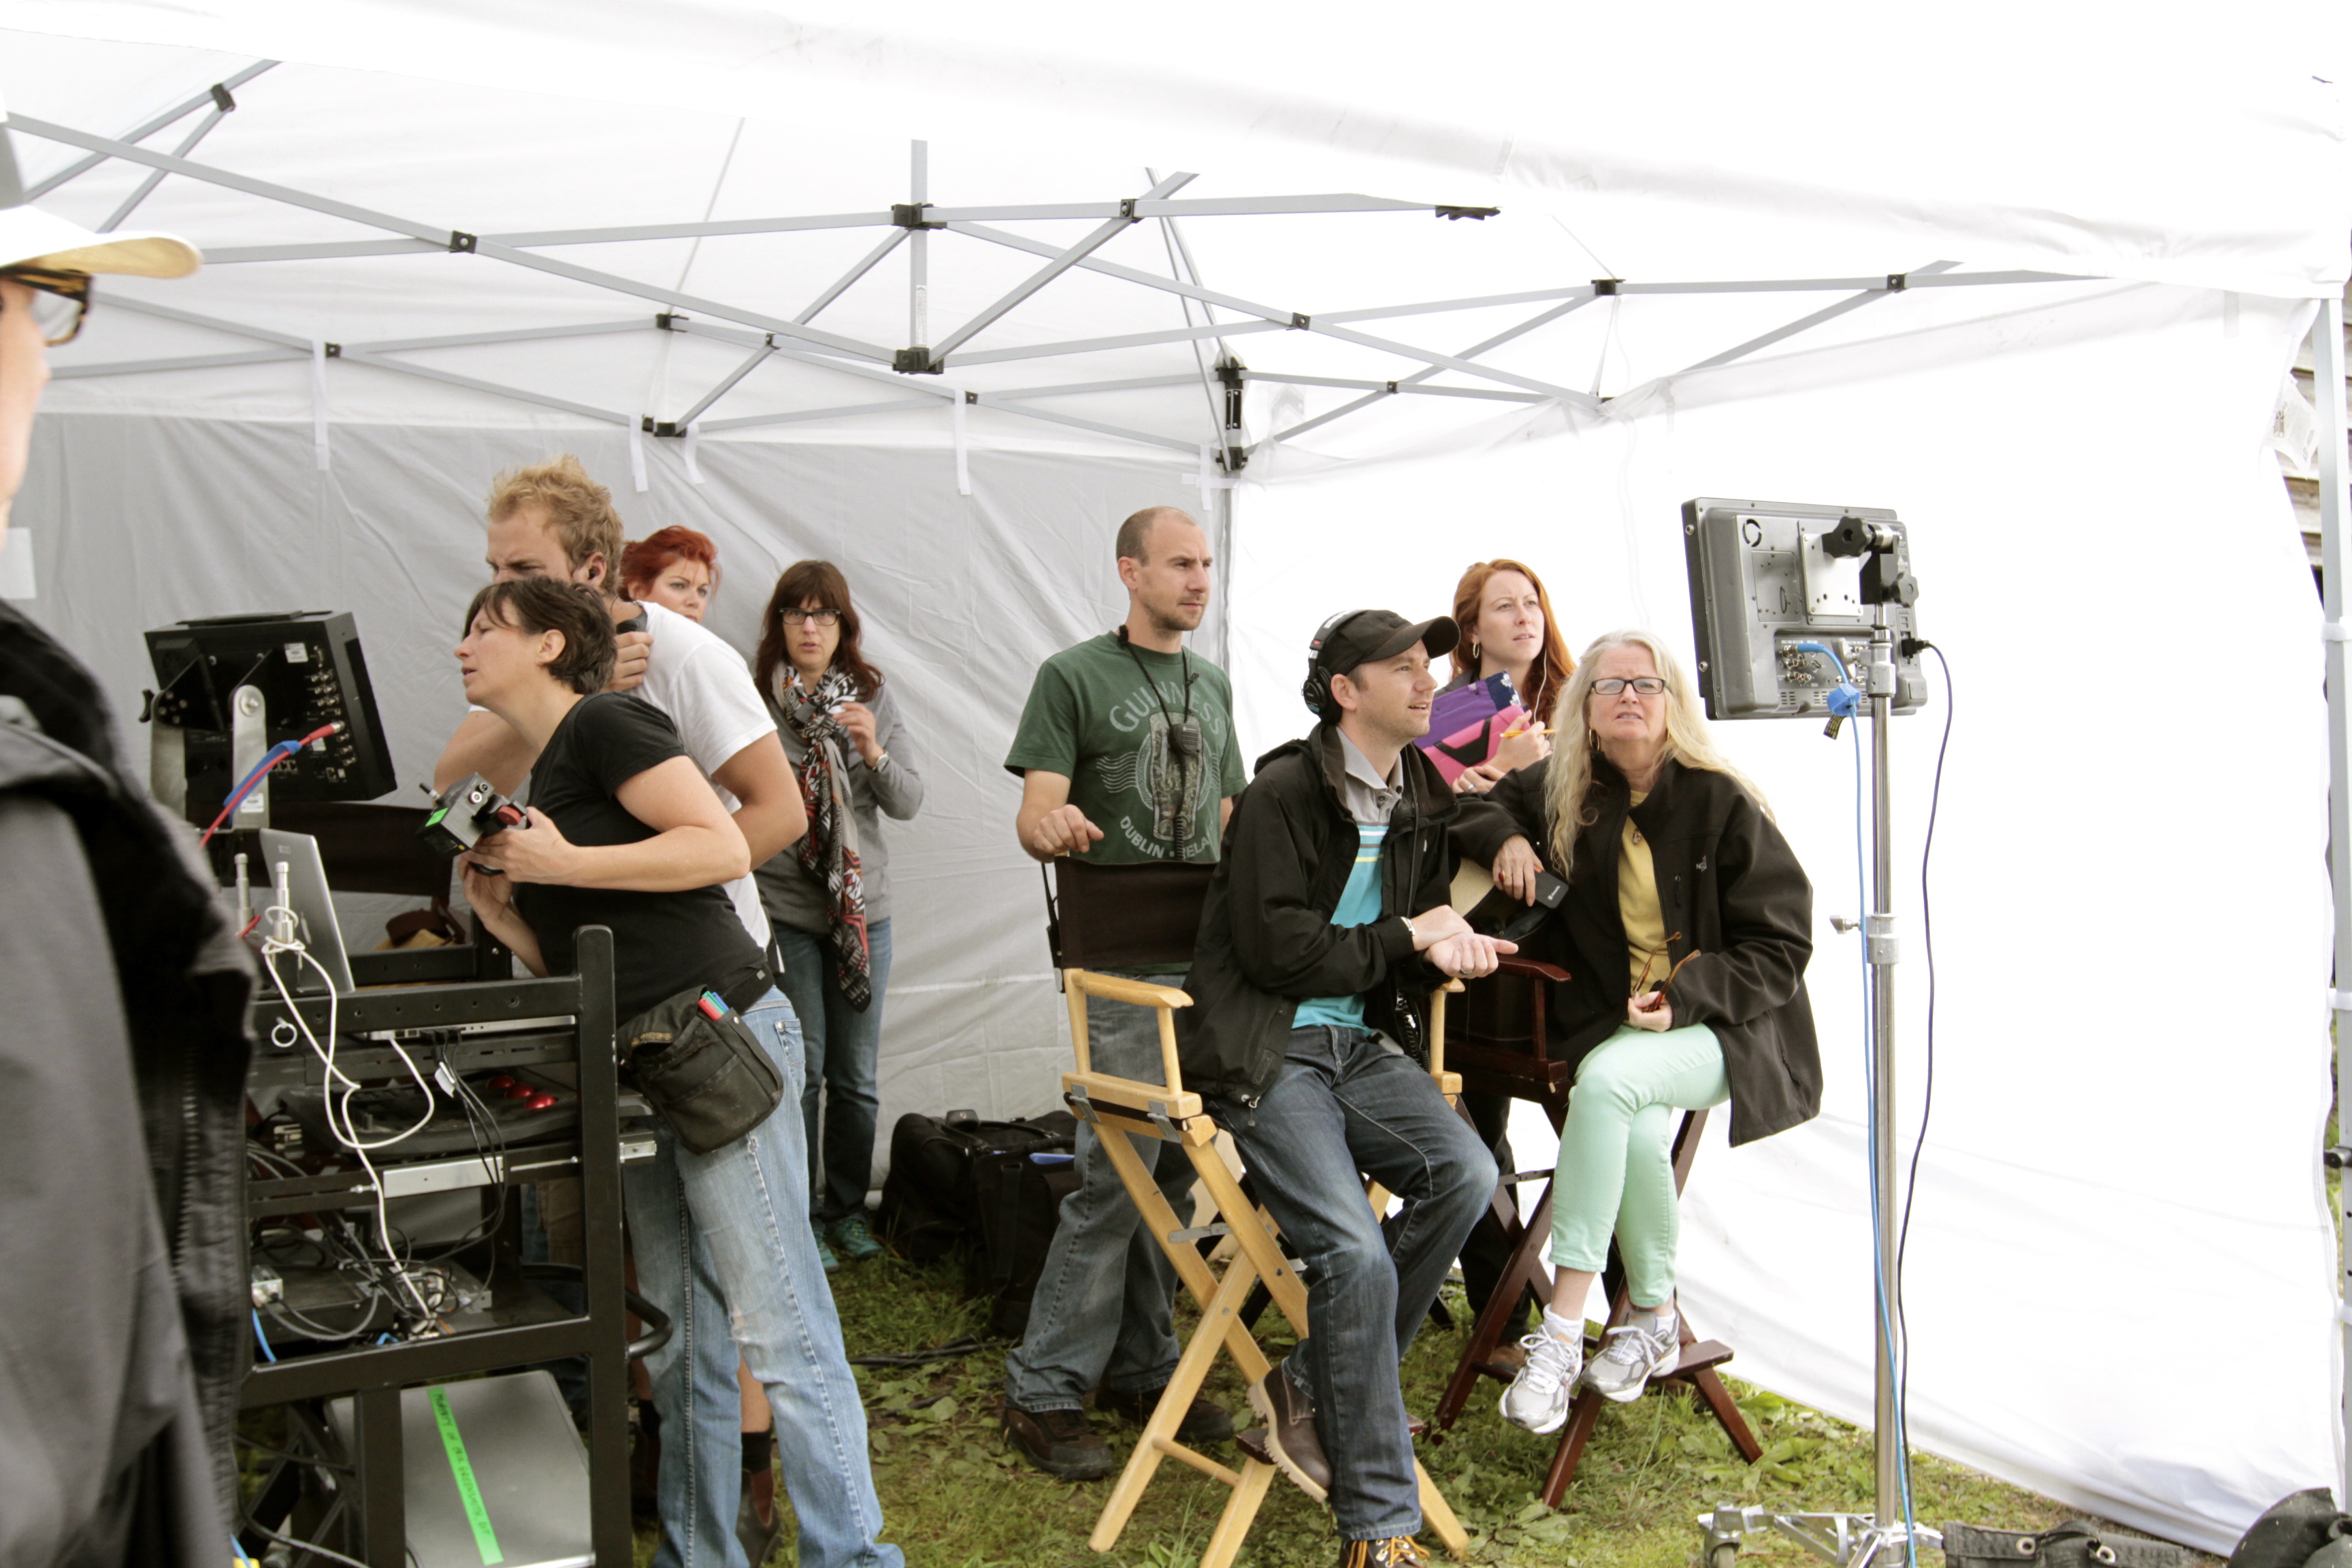 Director Kyle Portbury with writer Holly Goldberg Sloan on set during filming of Tell the World.